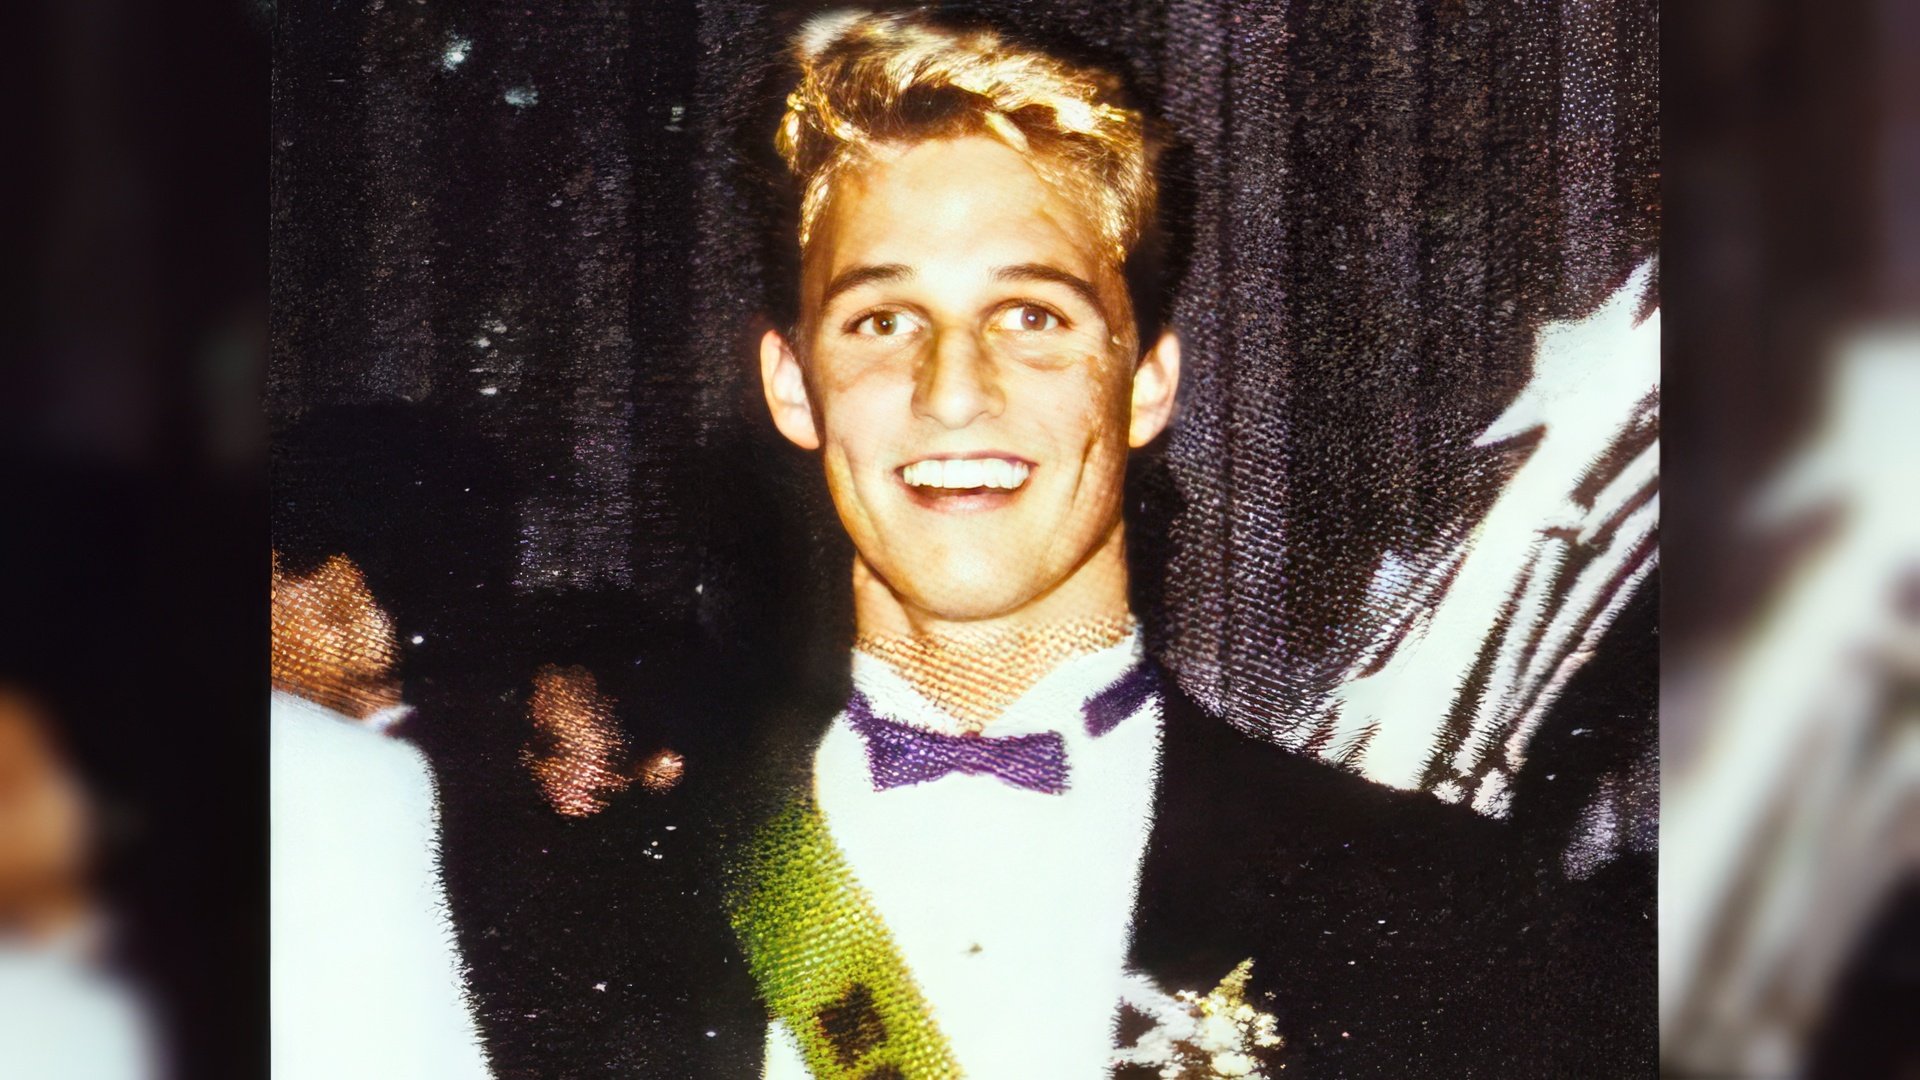 McConaughey – the most handsome at school